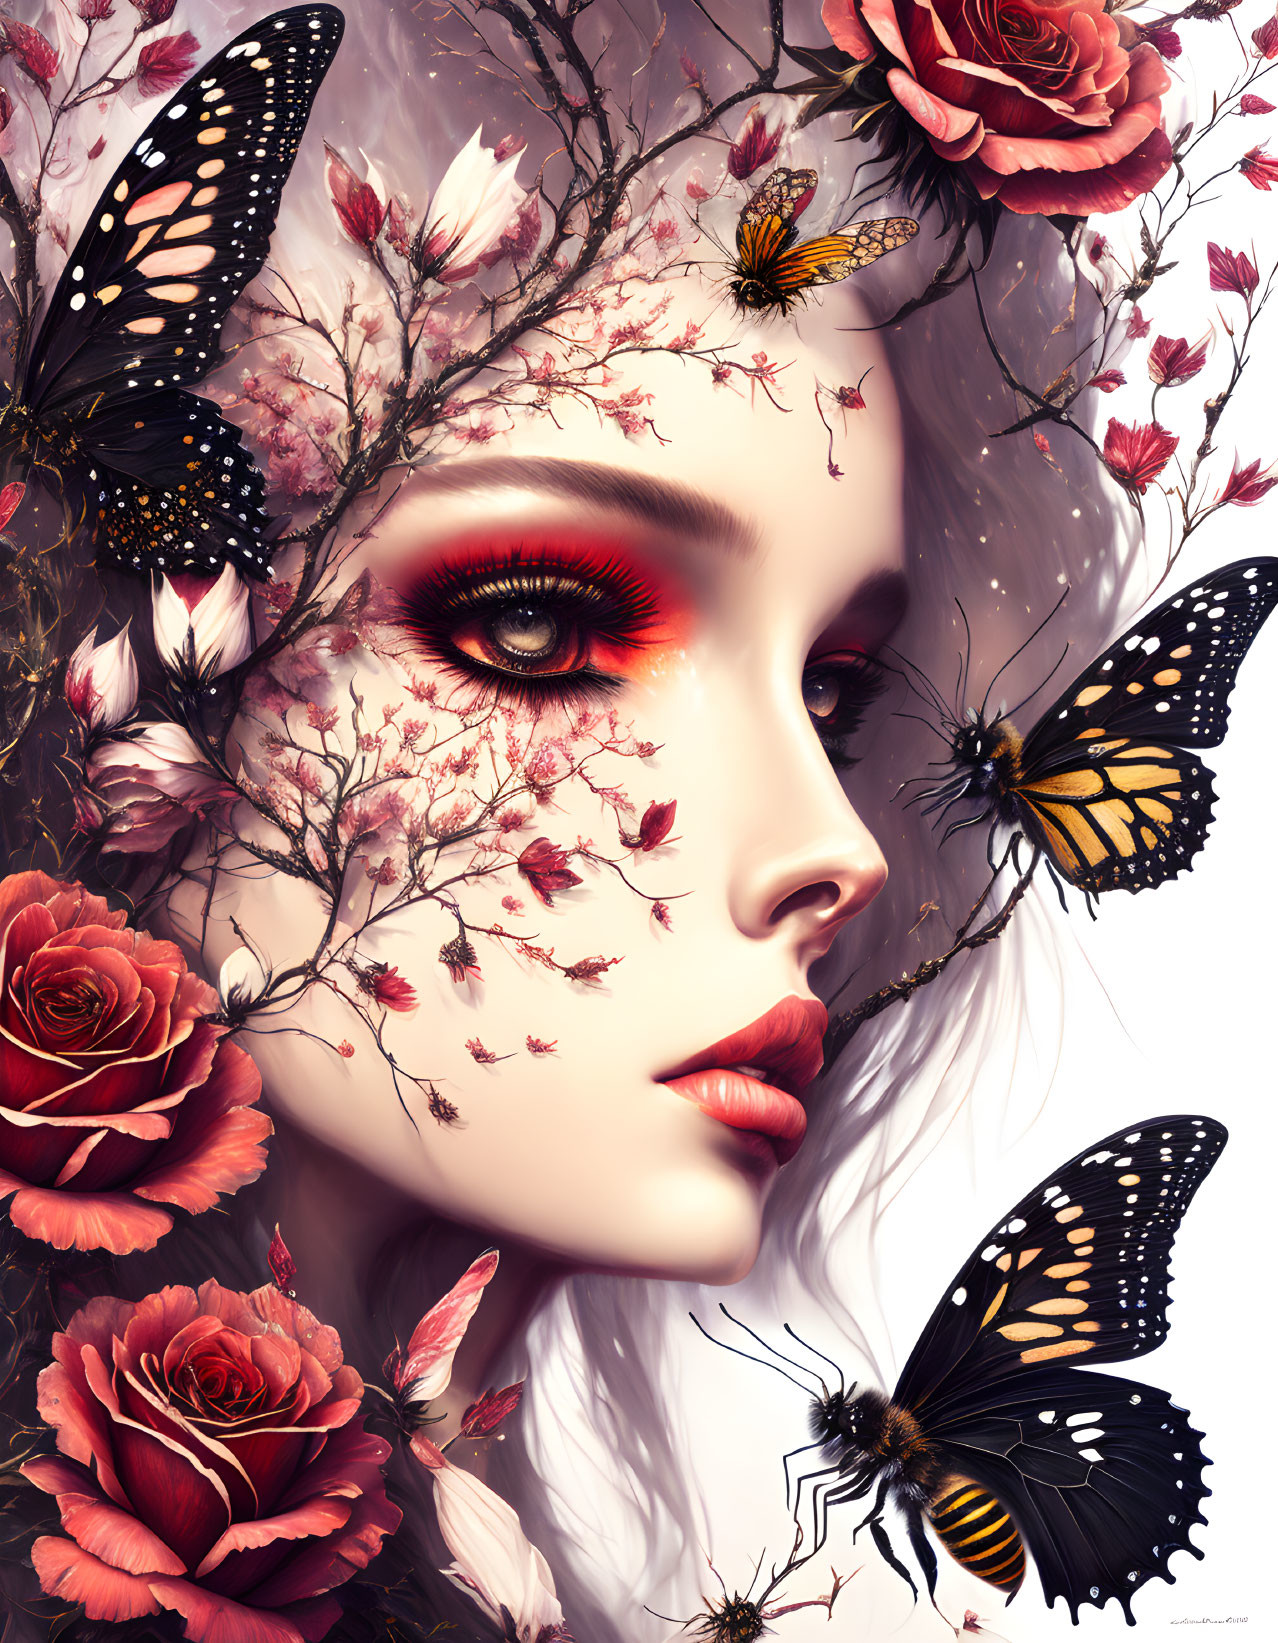 Vibrant digital artwork: Woman's face with roses and butterflies